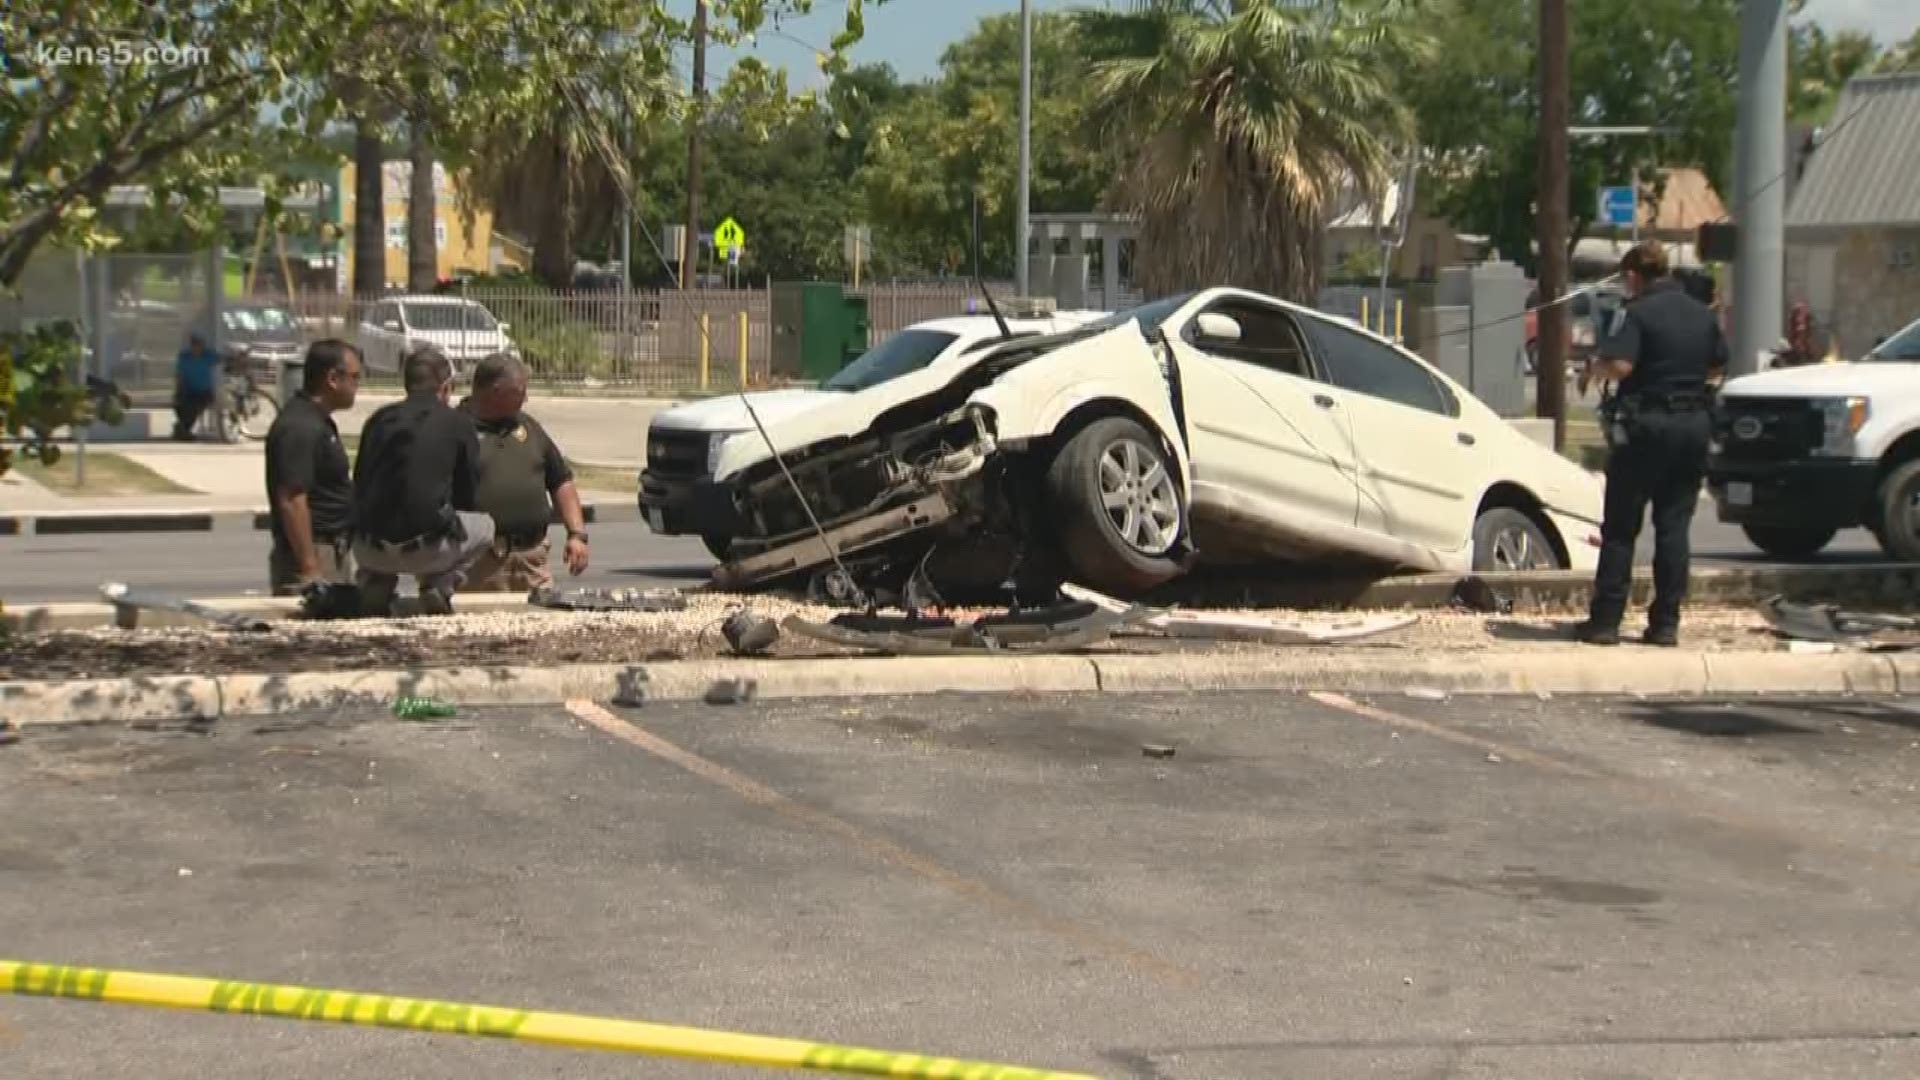 Four people are fighting for their lives after a driver lost control of his car and plowed through a VIA bus stop. Eyewitness News reporter Sue Calberg is live at the corner of Culebra and Zarzamora.